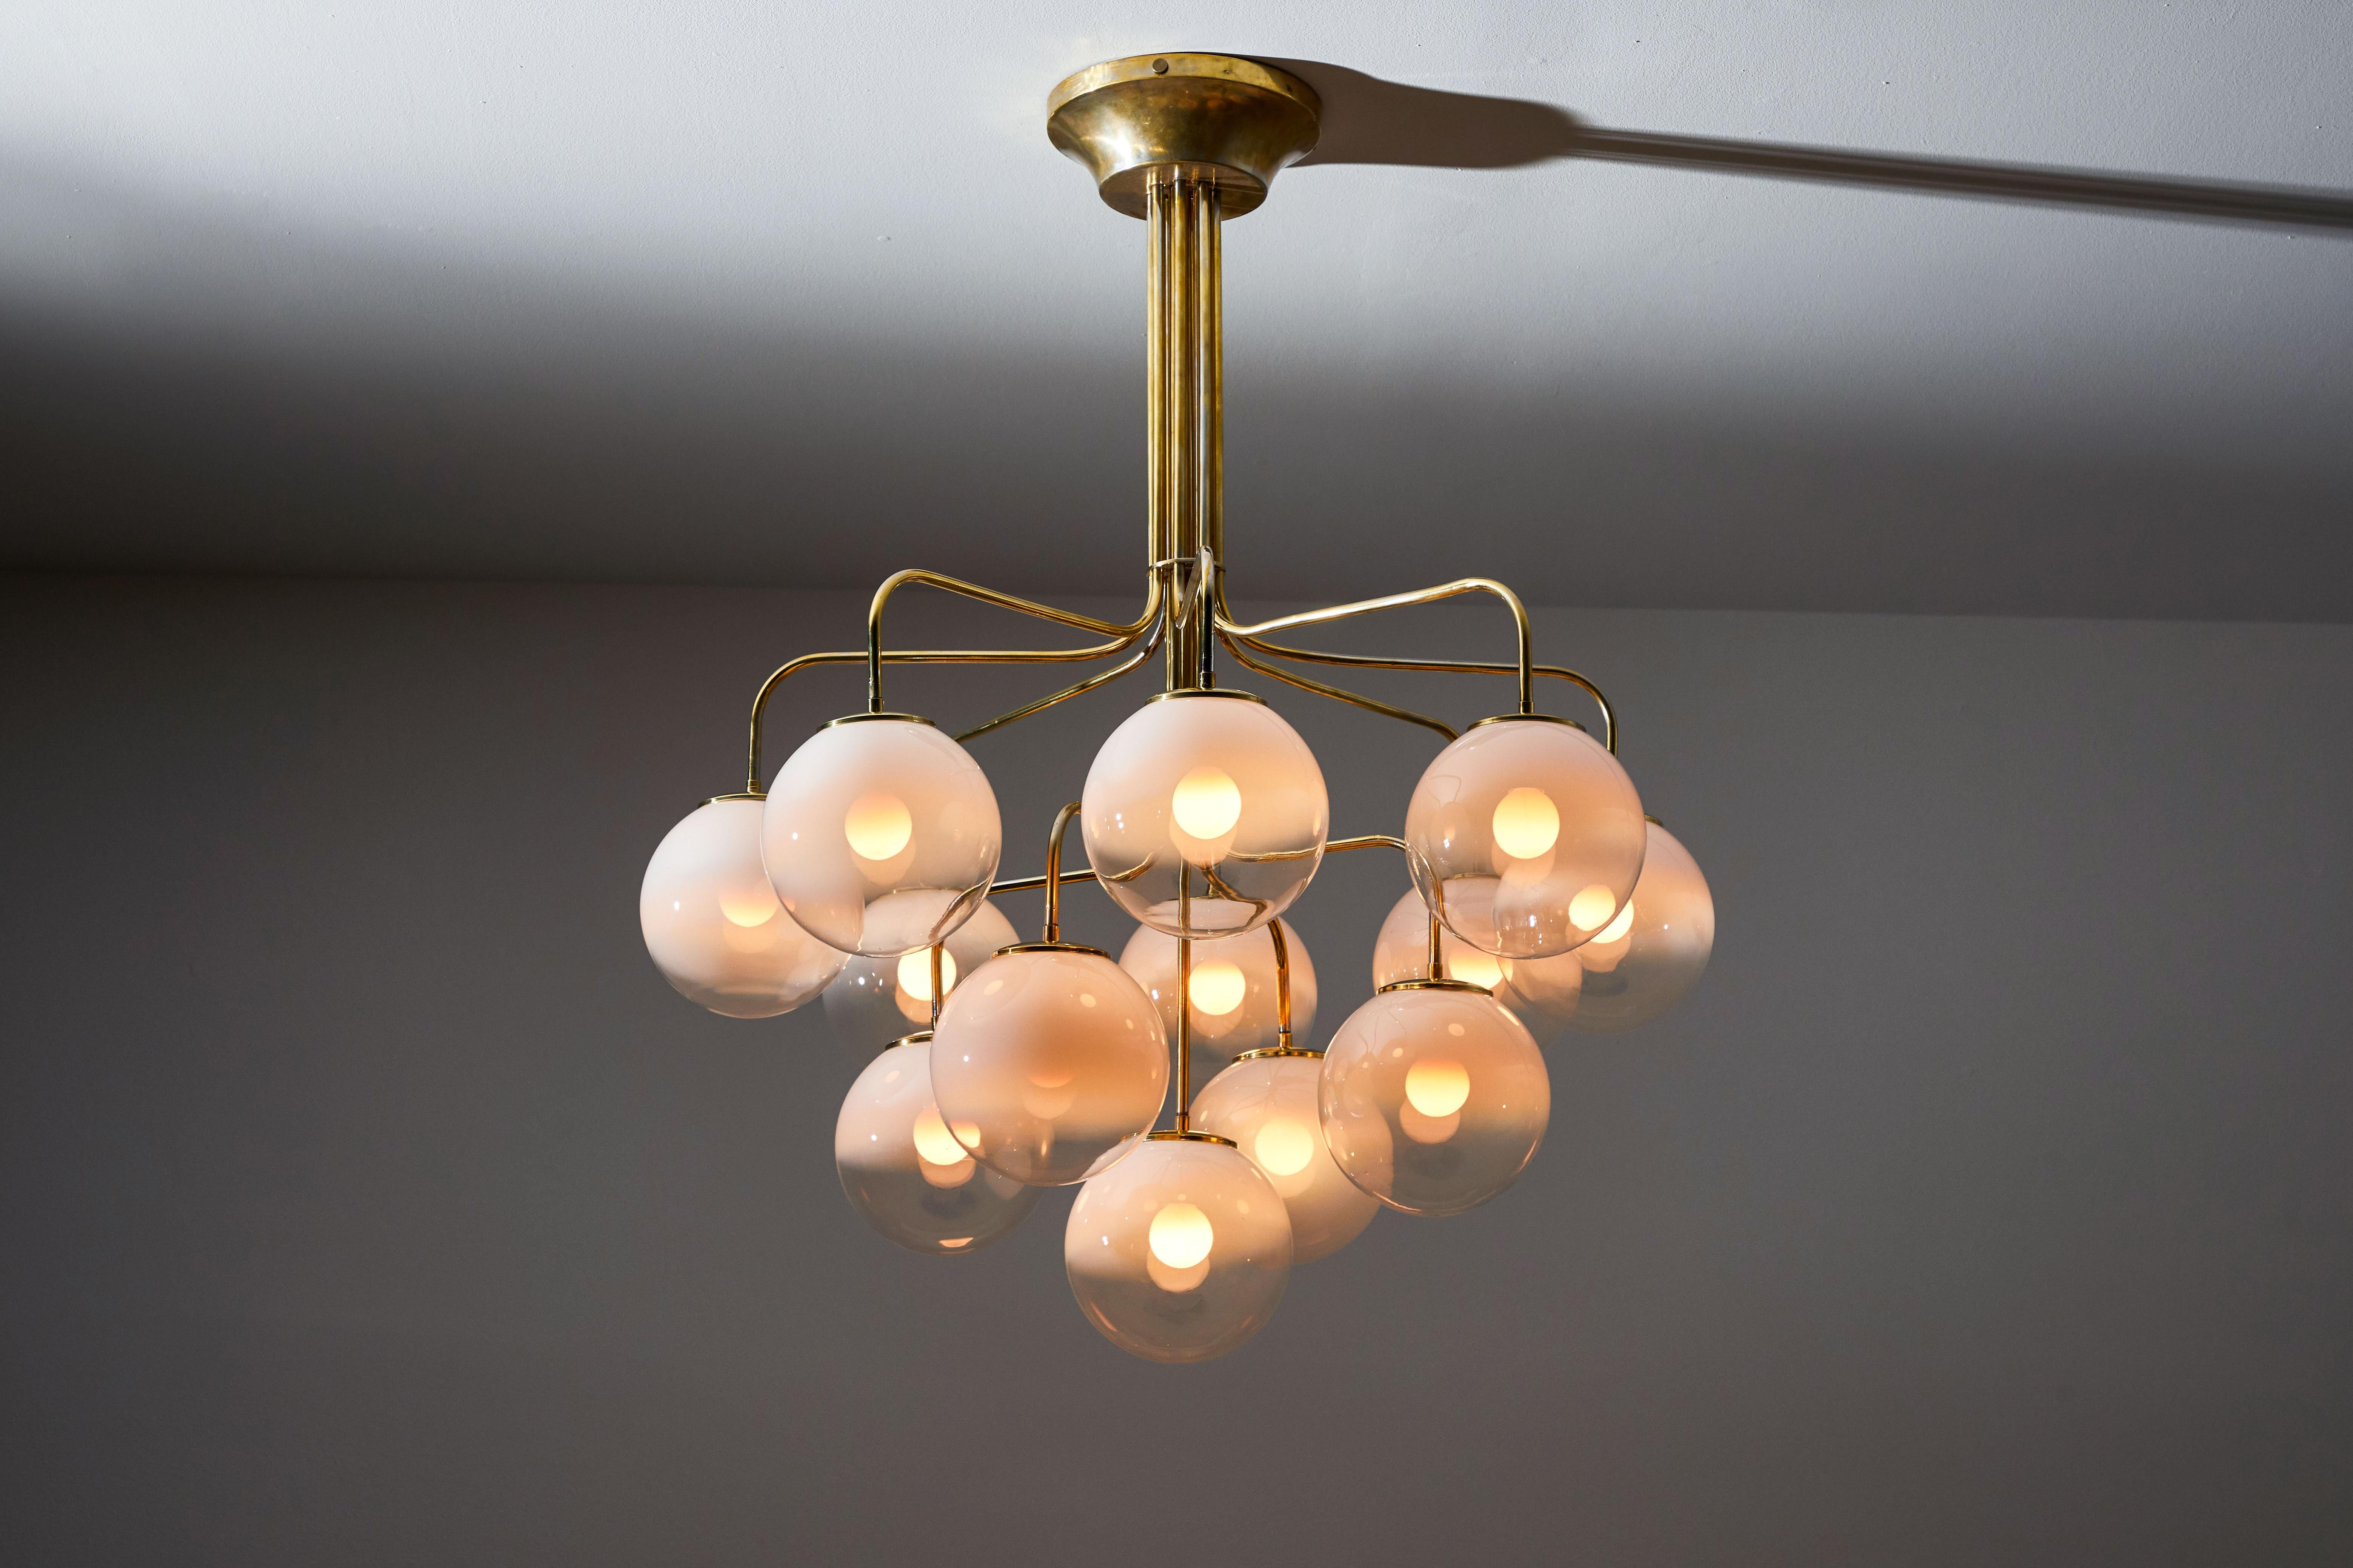 Thirteen globe chandelier by Angelo Mangiarotti for Candle. Designed and manufactured in Italy, circa 1960s. Brass with hand blown two-toned opaque Murano globes. Rewired for US junction boxes. Each globe takes one E27 25w maximum bulbs. Bulbs